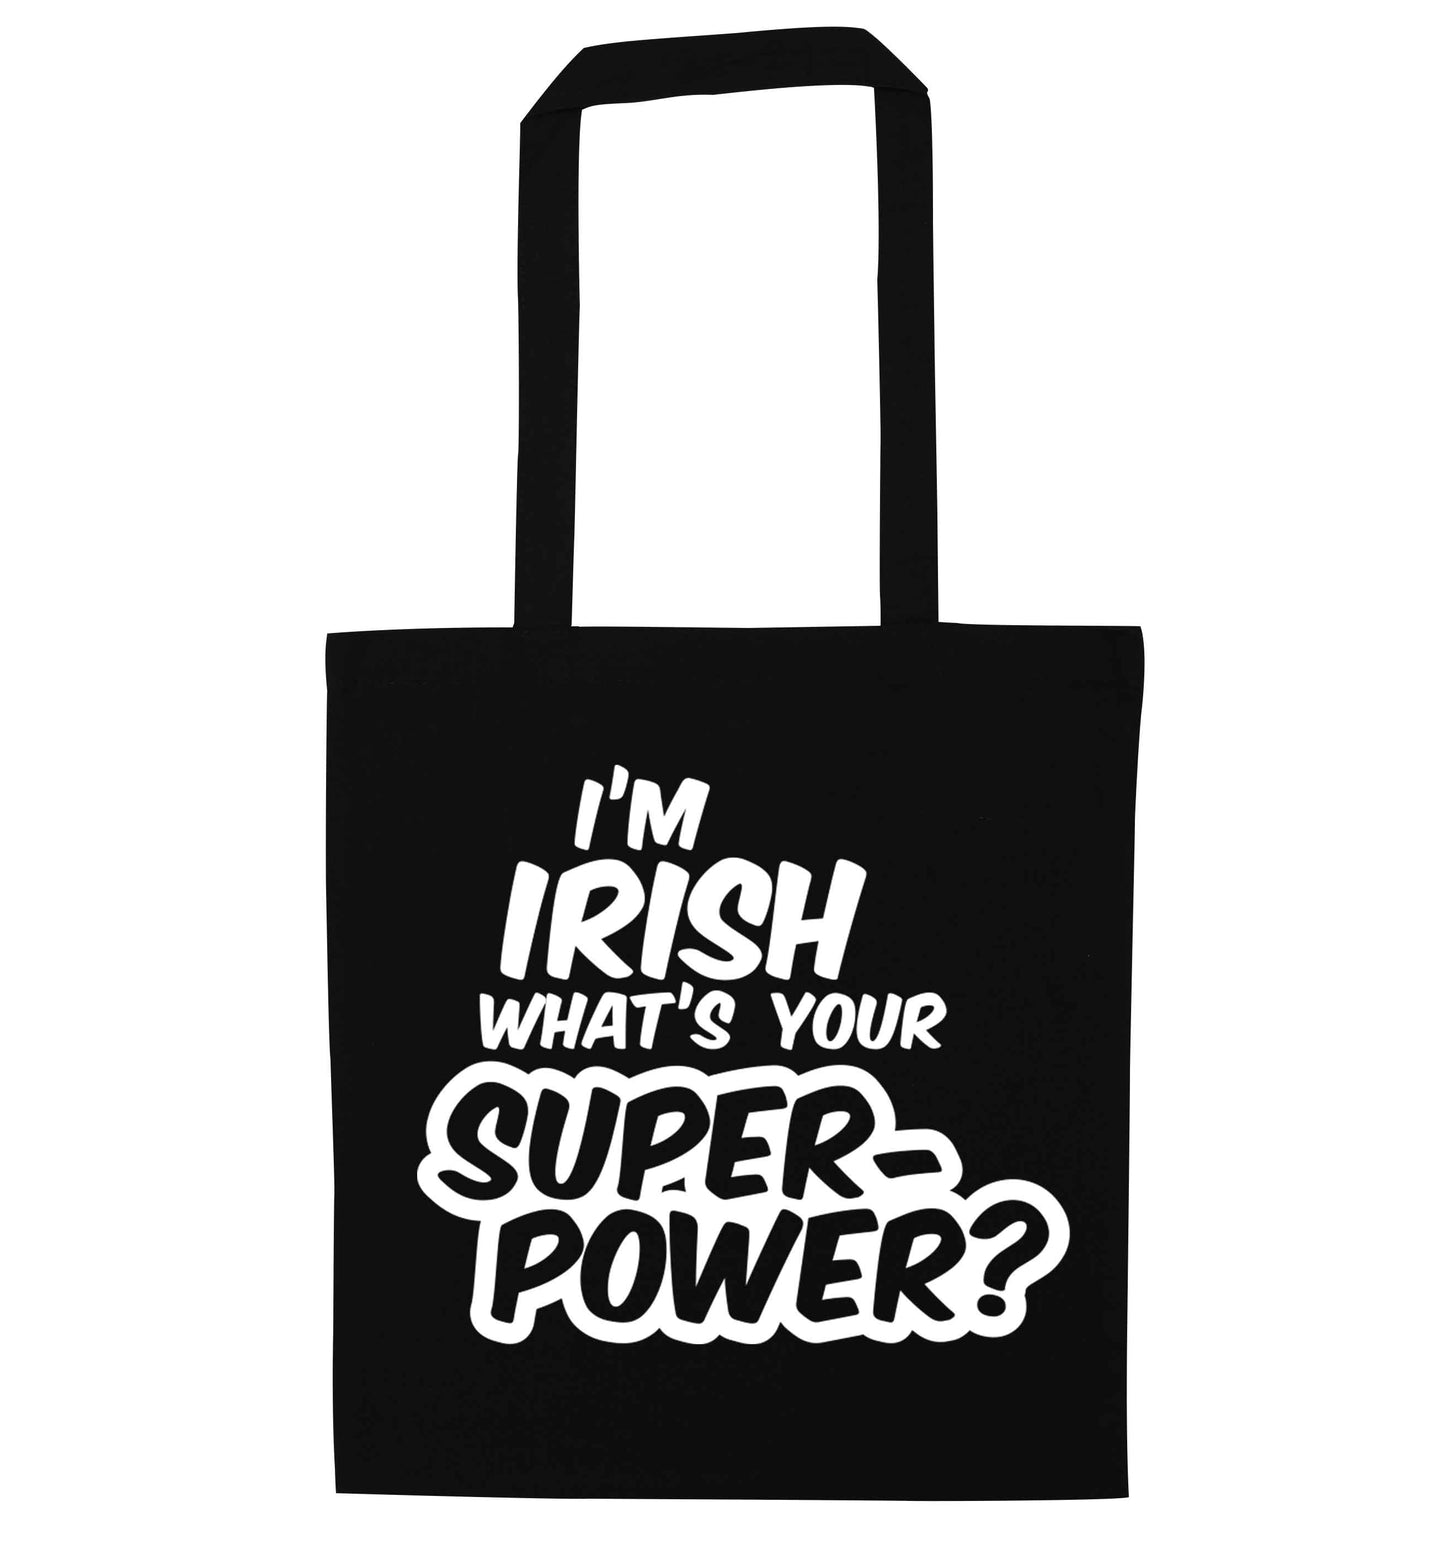 I'm Irish what's your superpower? black tote bag